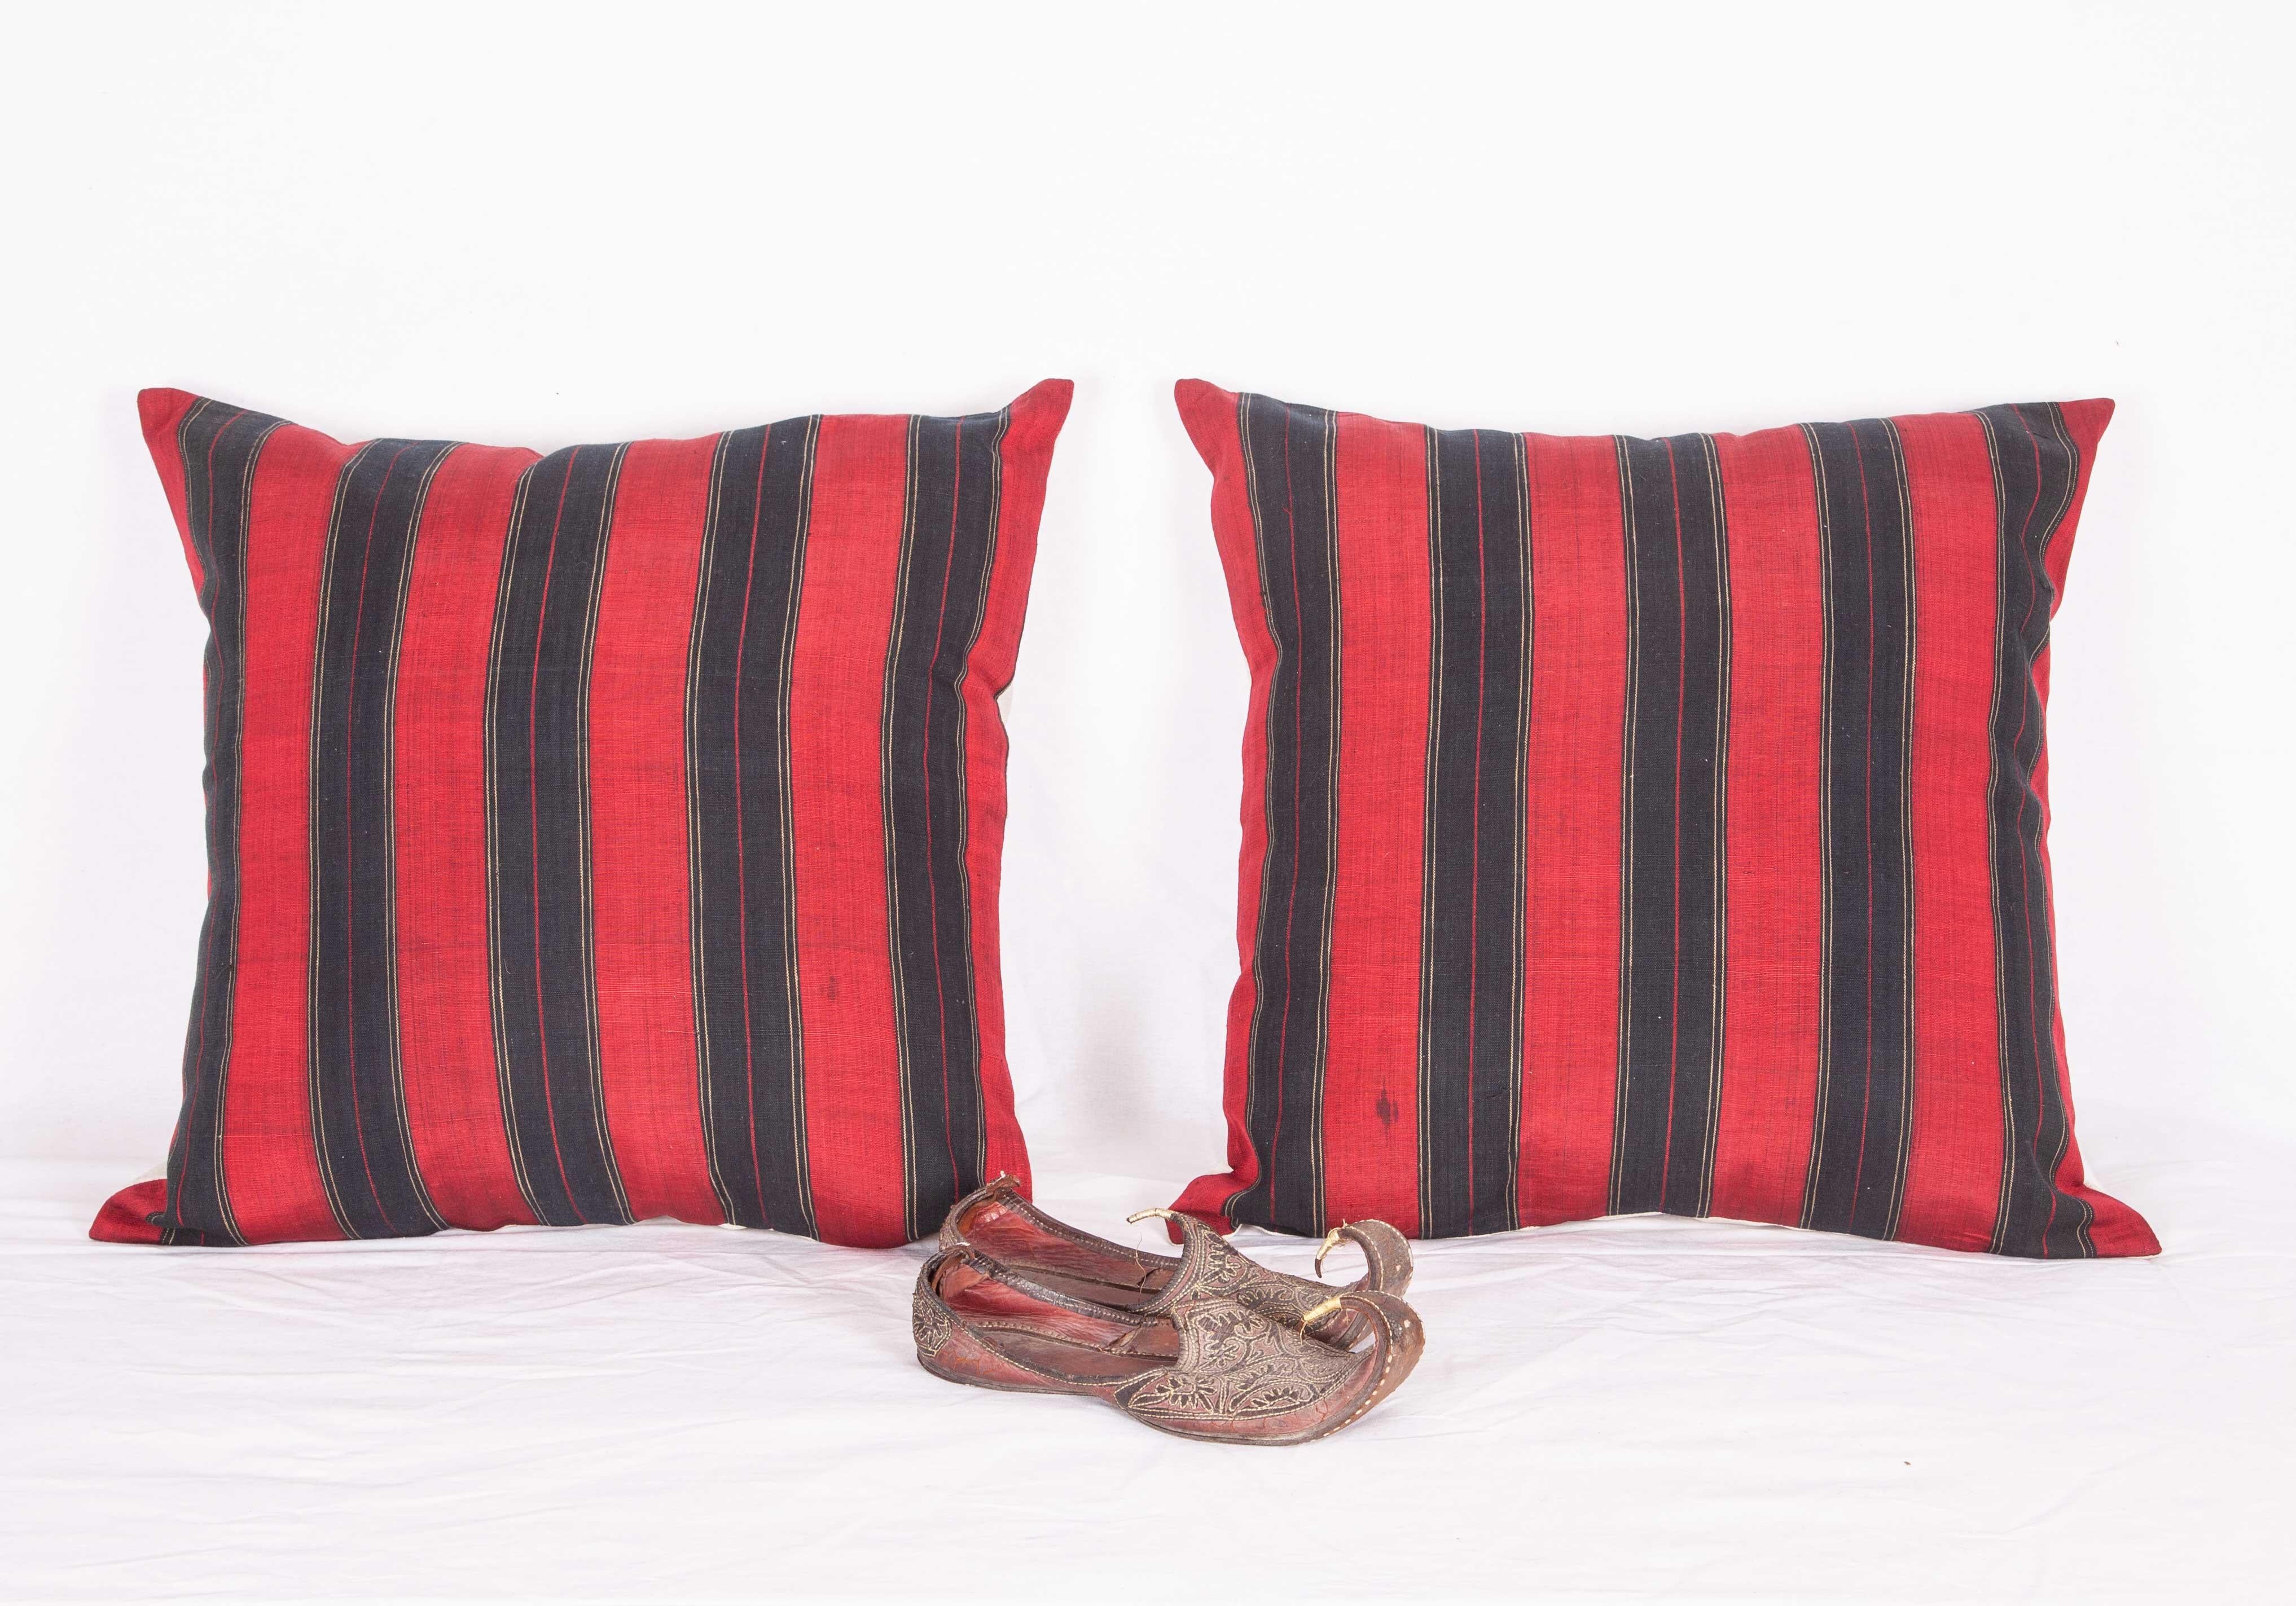 The pillow cases were made from an early 20th century Afghan Waziri, silk and cotton shawl. The red parts are in silk. They do not come with inserts but it come with bags made to the size and out of cotton to accommodate the filling materials. The